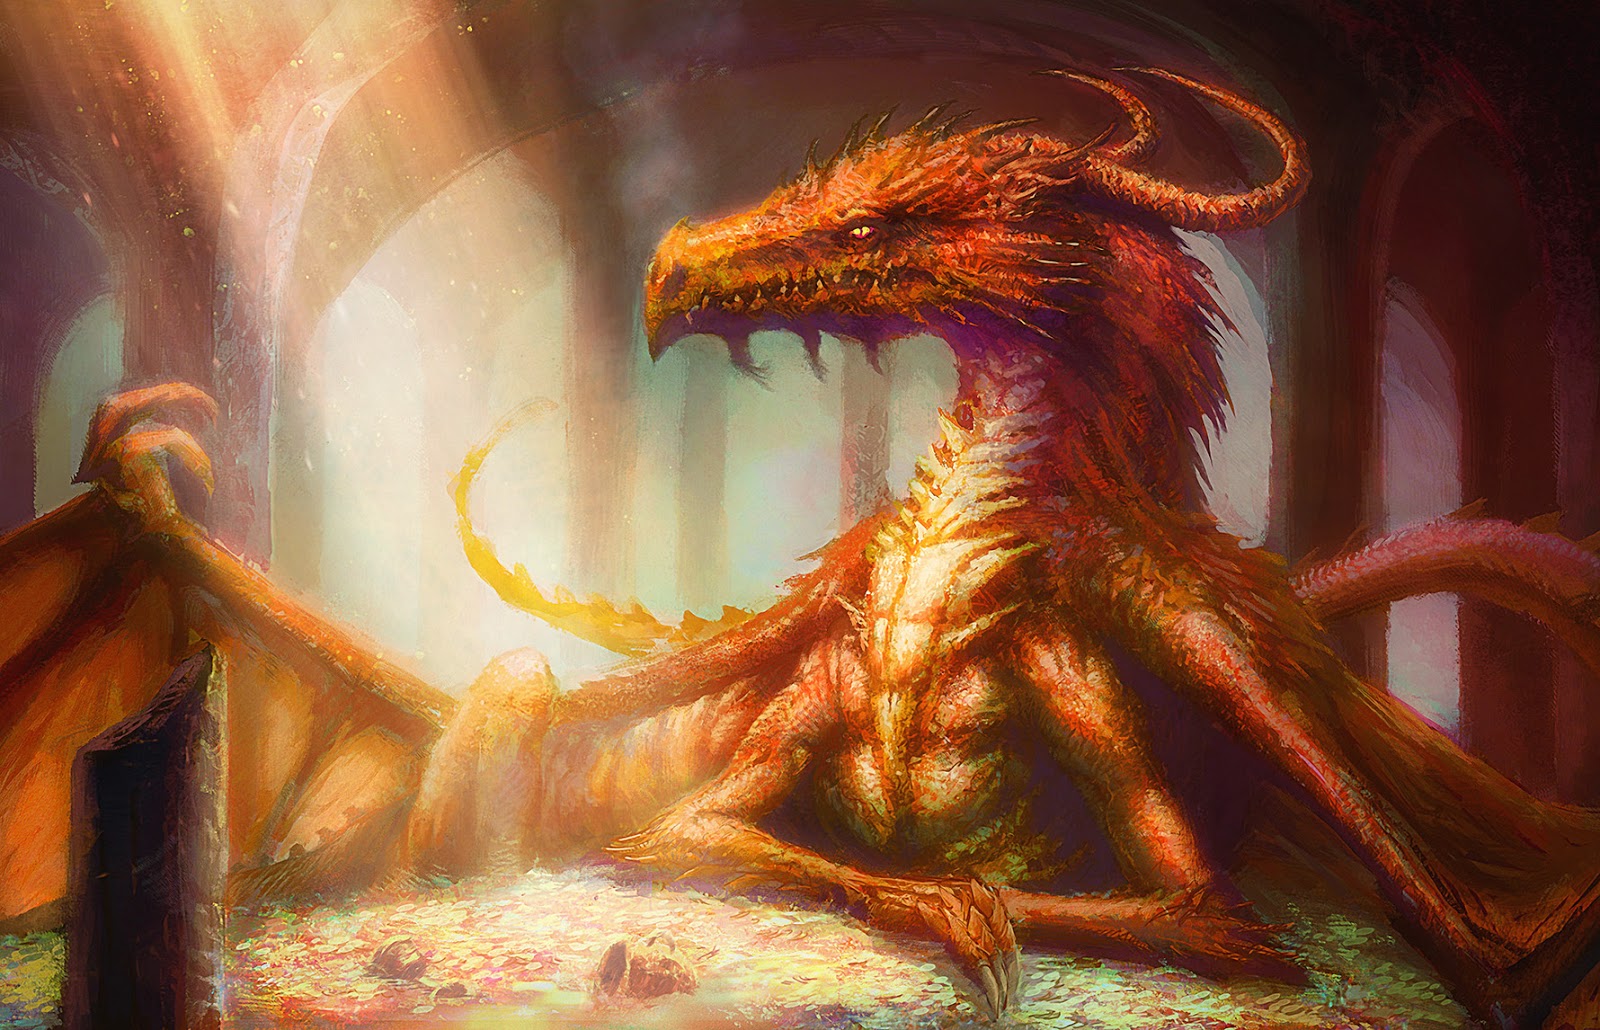 This Is My Of The Famous Dragon Called Smaug In Hobbit